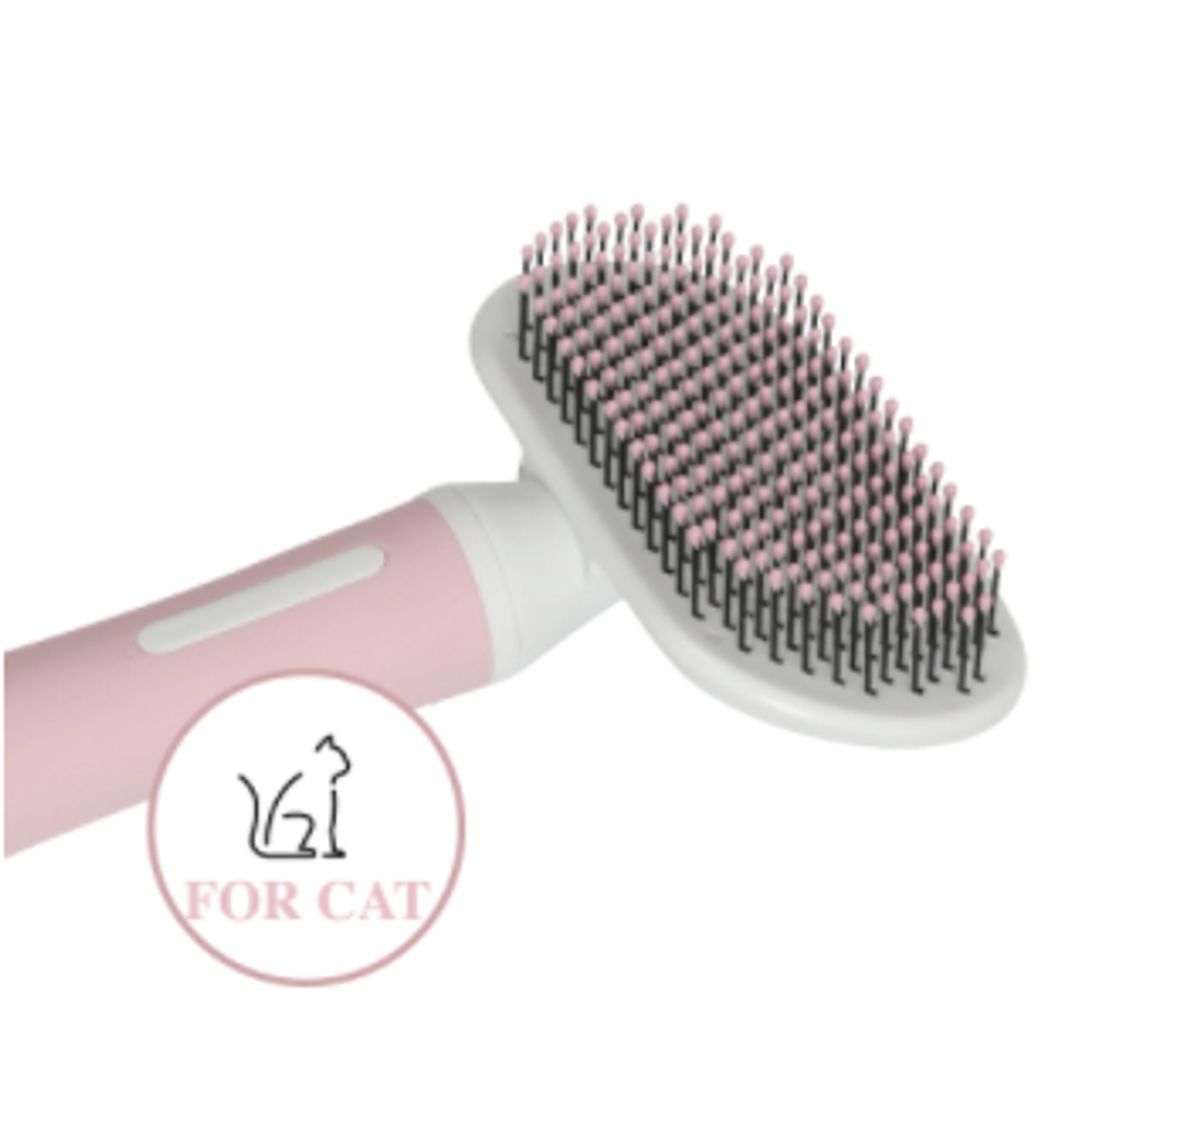 Brosse slicker pour chat douce Anah - Zolux